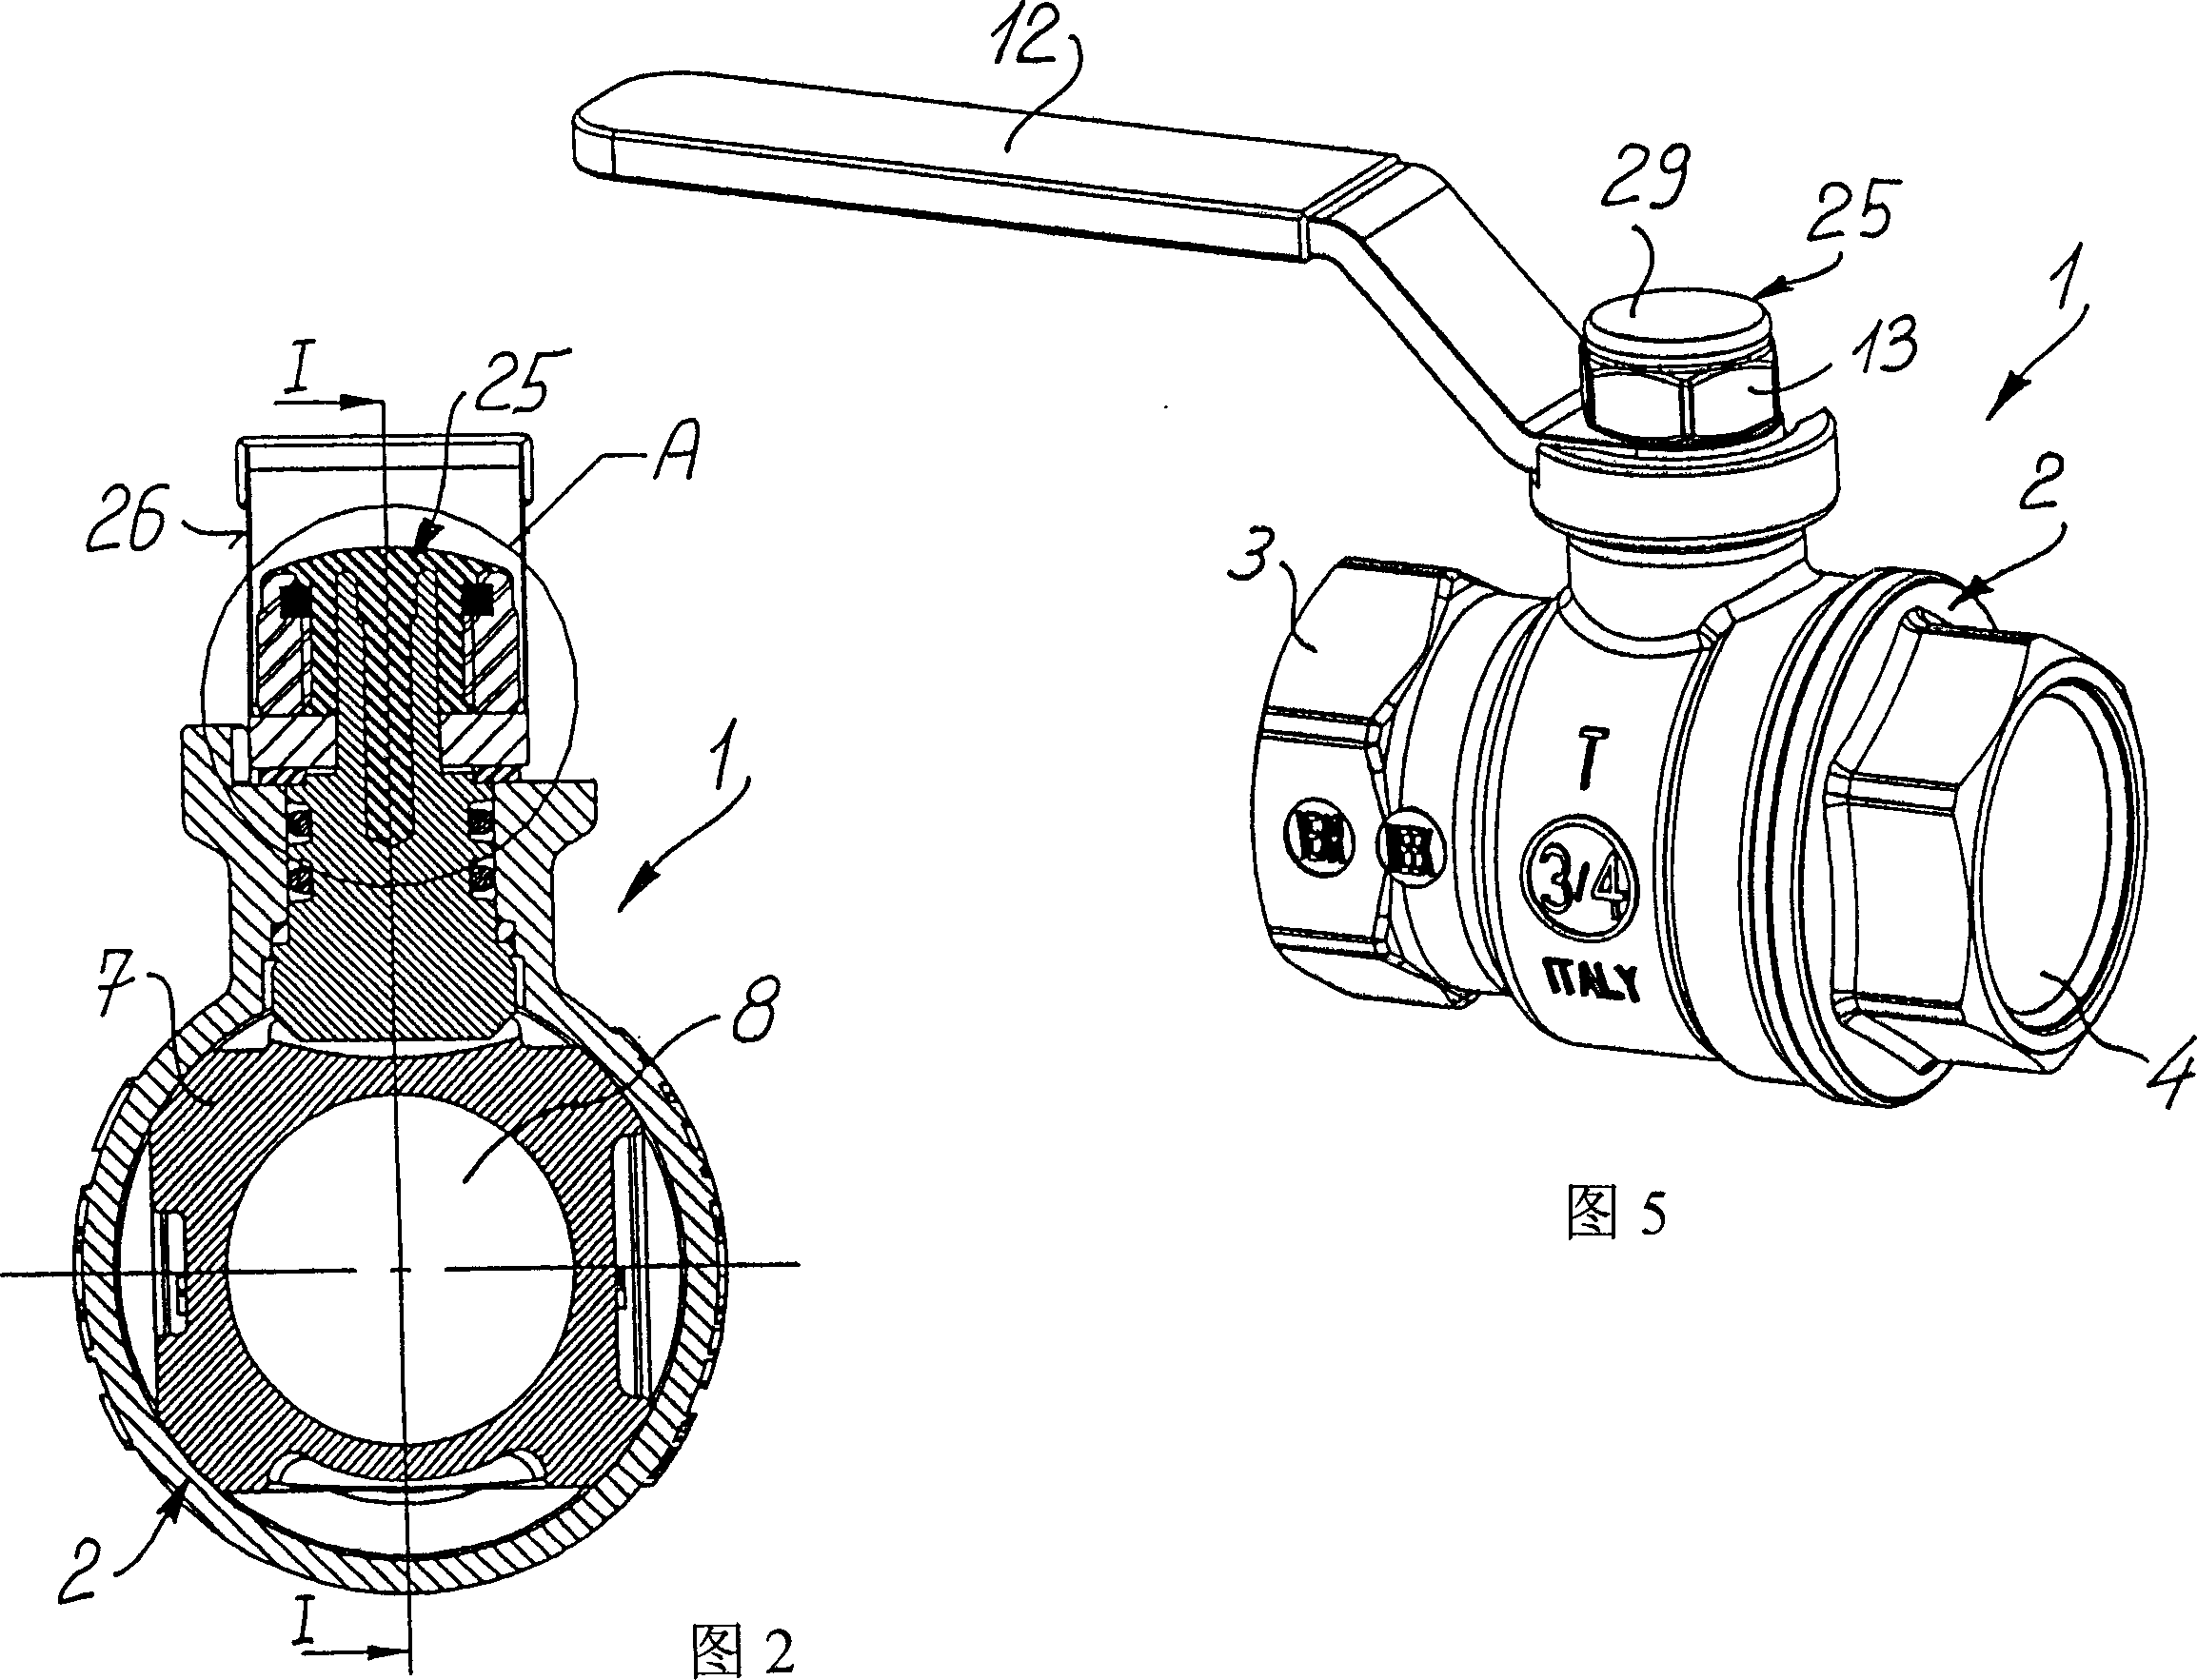 Improved valve for gas systems